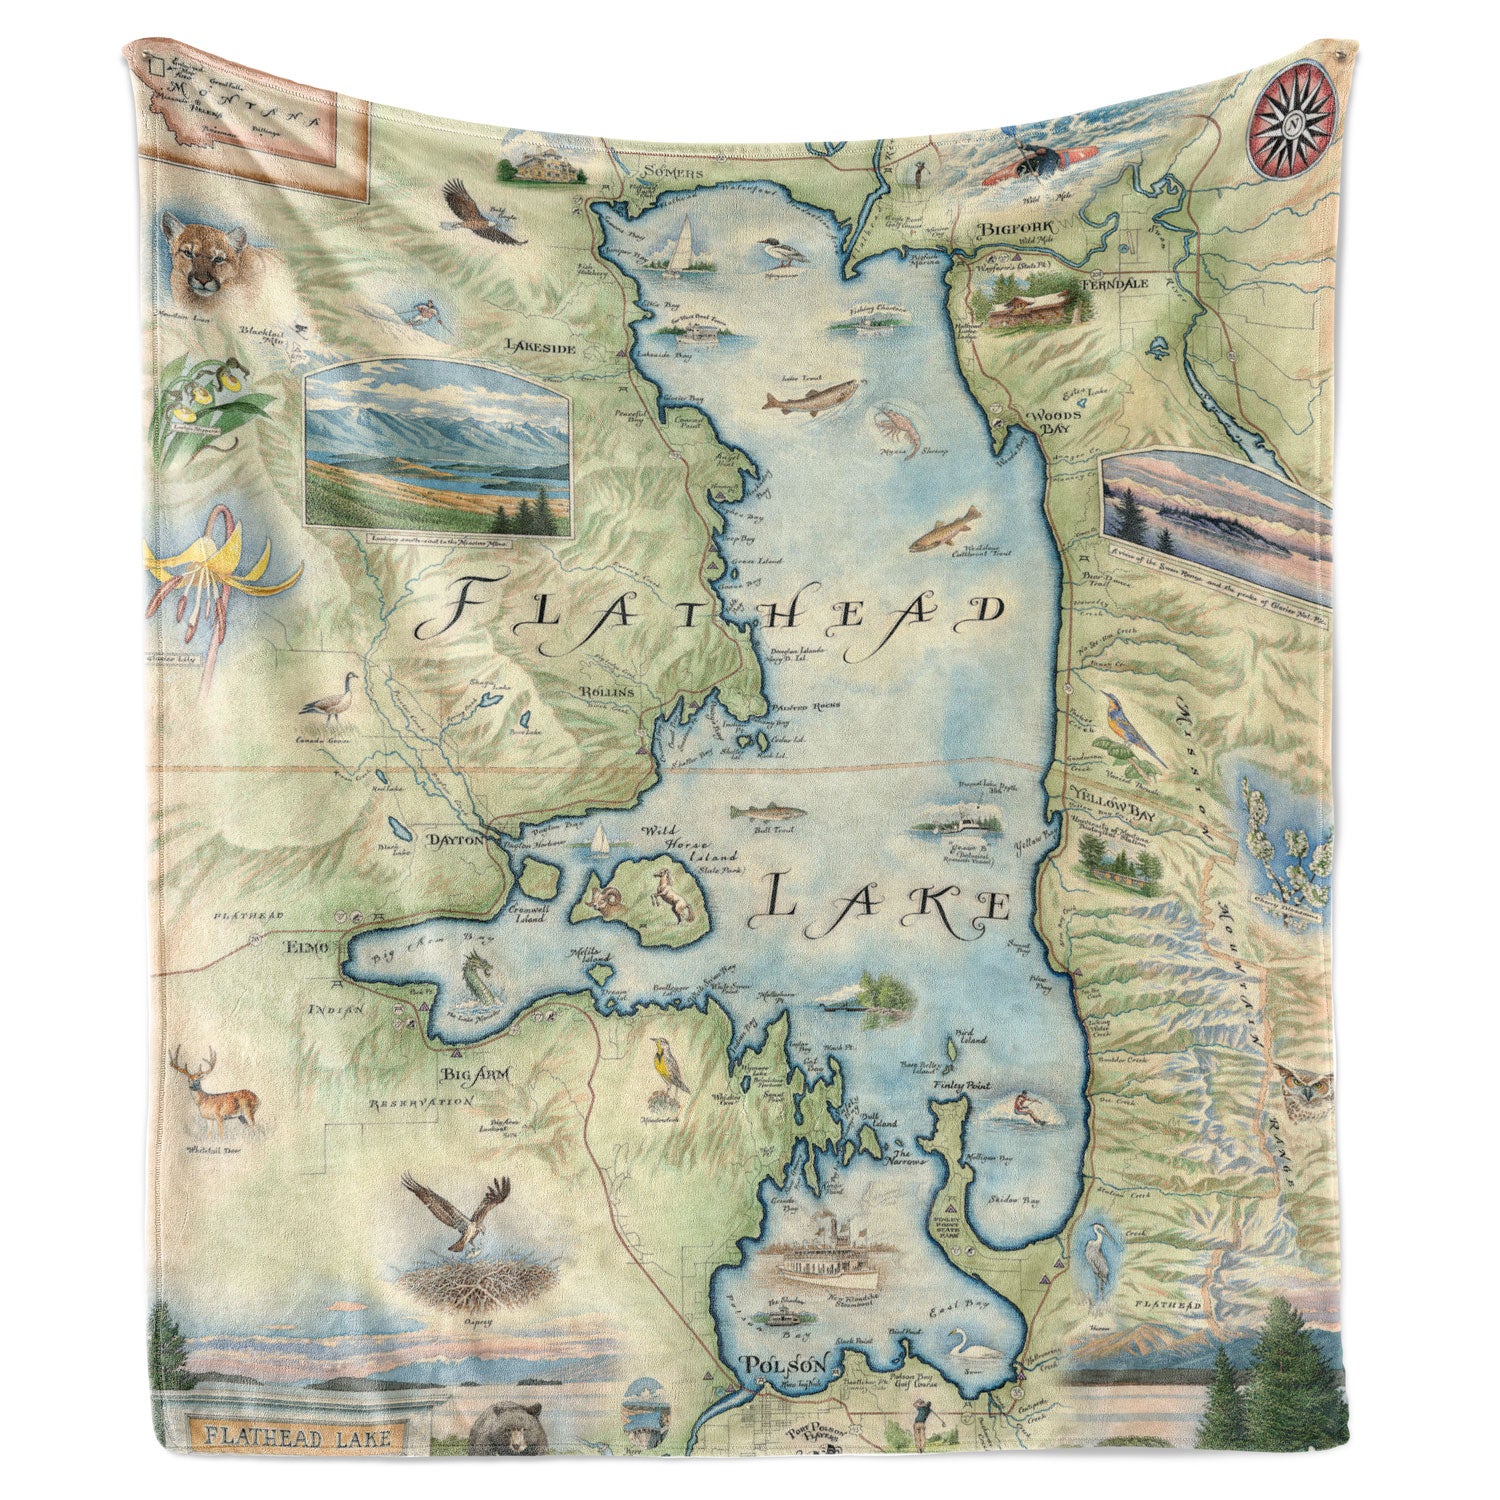 Hanging blanket with a map of Flathead Lake in Montana on it. The blanket measures 58